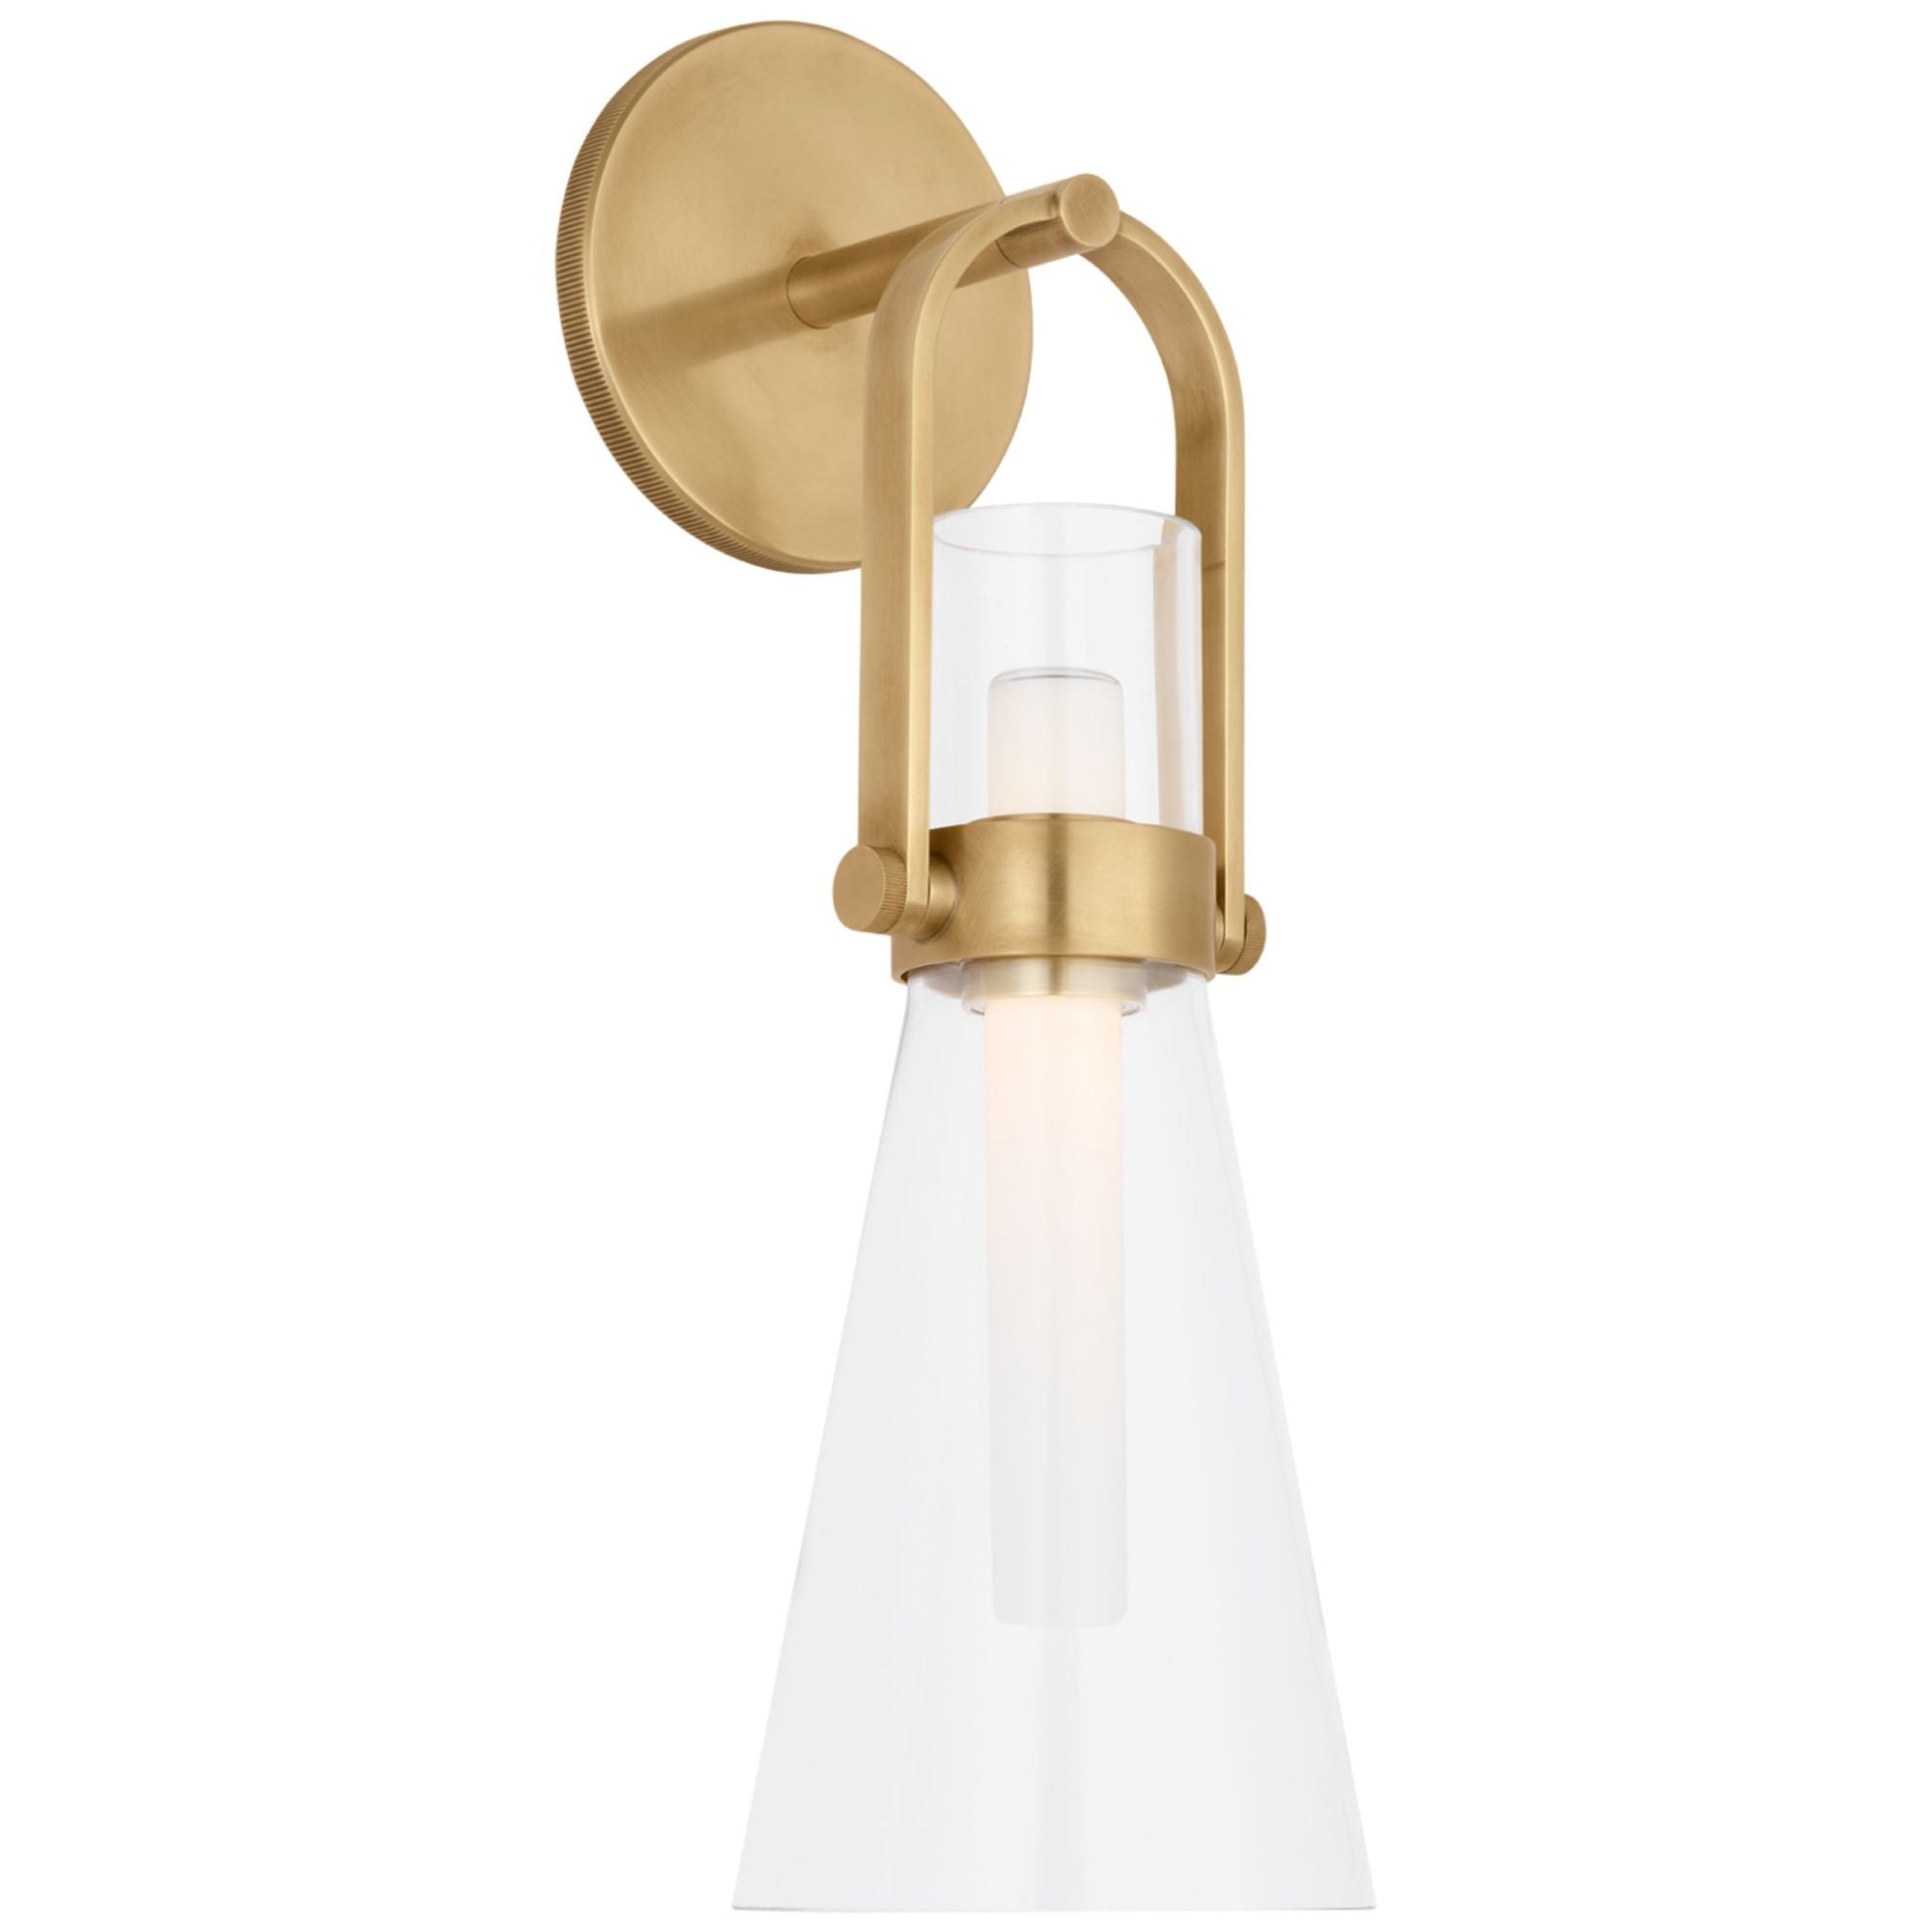 Ian K. Fowler Larkin Medium Conical Bracketed Sconce in Hand-Rubbed Antique Brass with Clear Glass